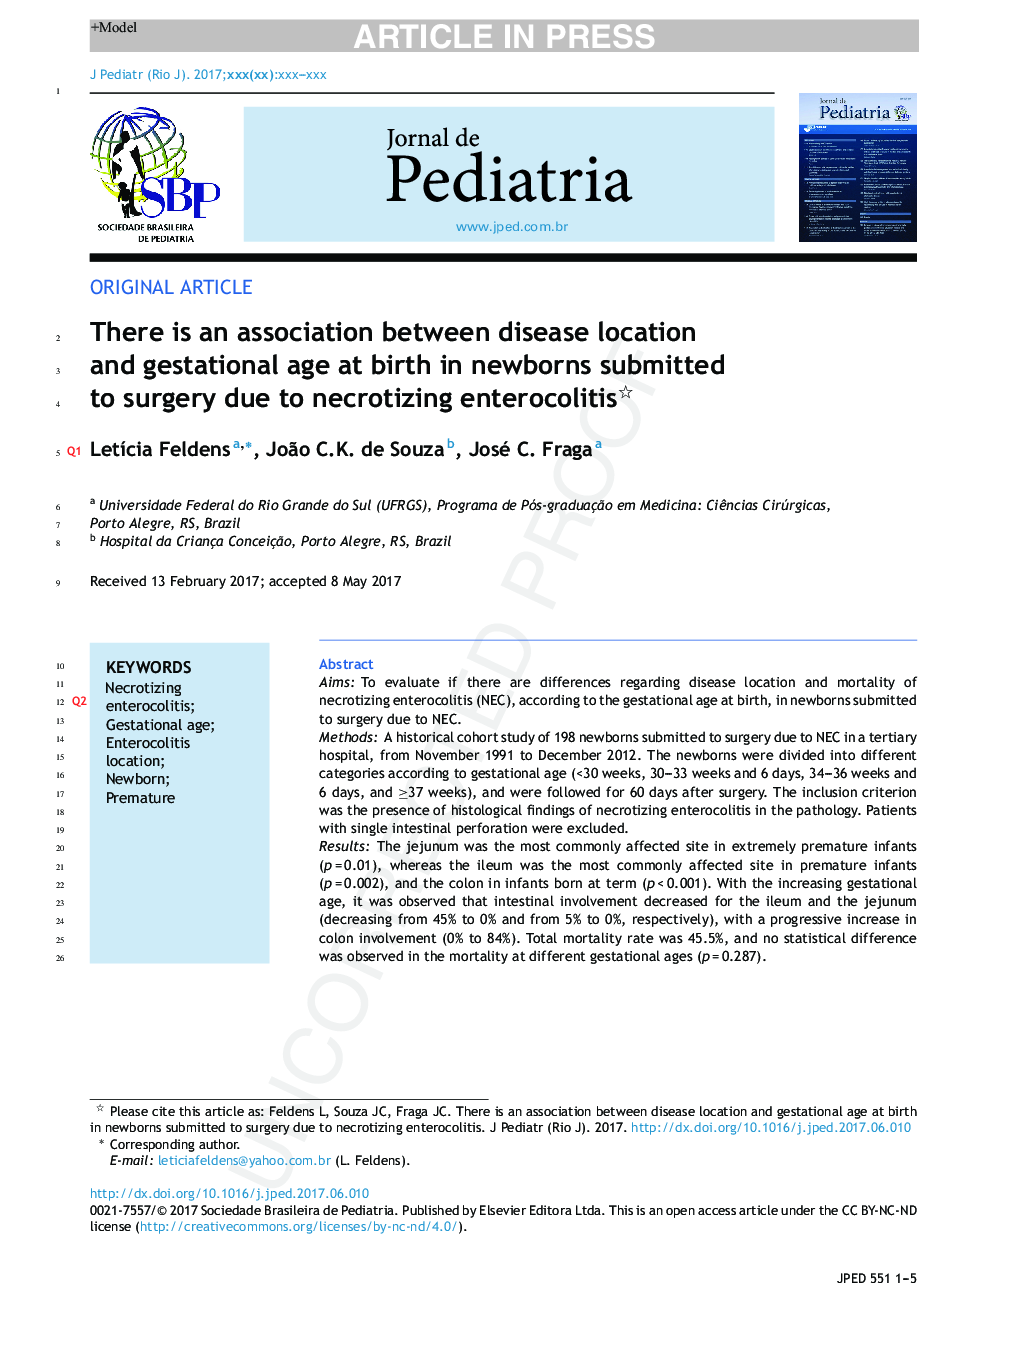 There is an association between disease location and gestational age at birth in newborns submitted to surgery due to necrotizing enterocolitis